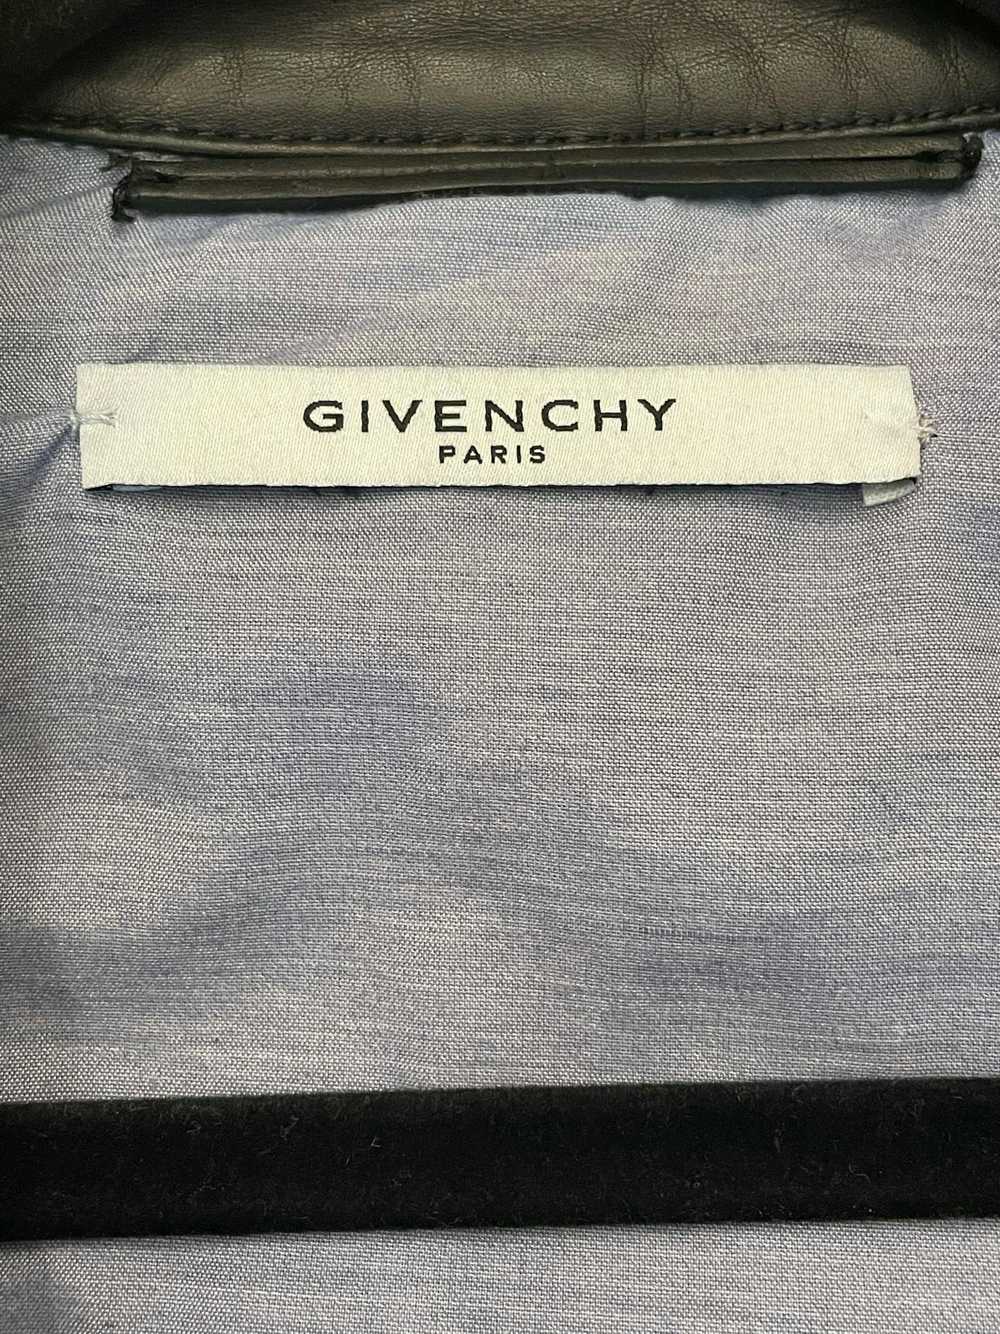 Givenchy GIvenchy SS17 Denim Leather Collared Zip… - image 6